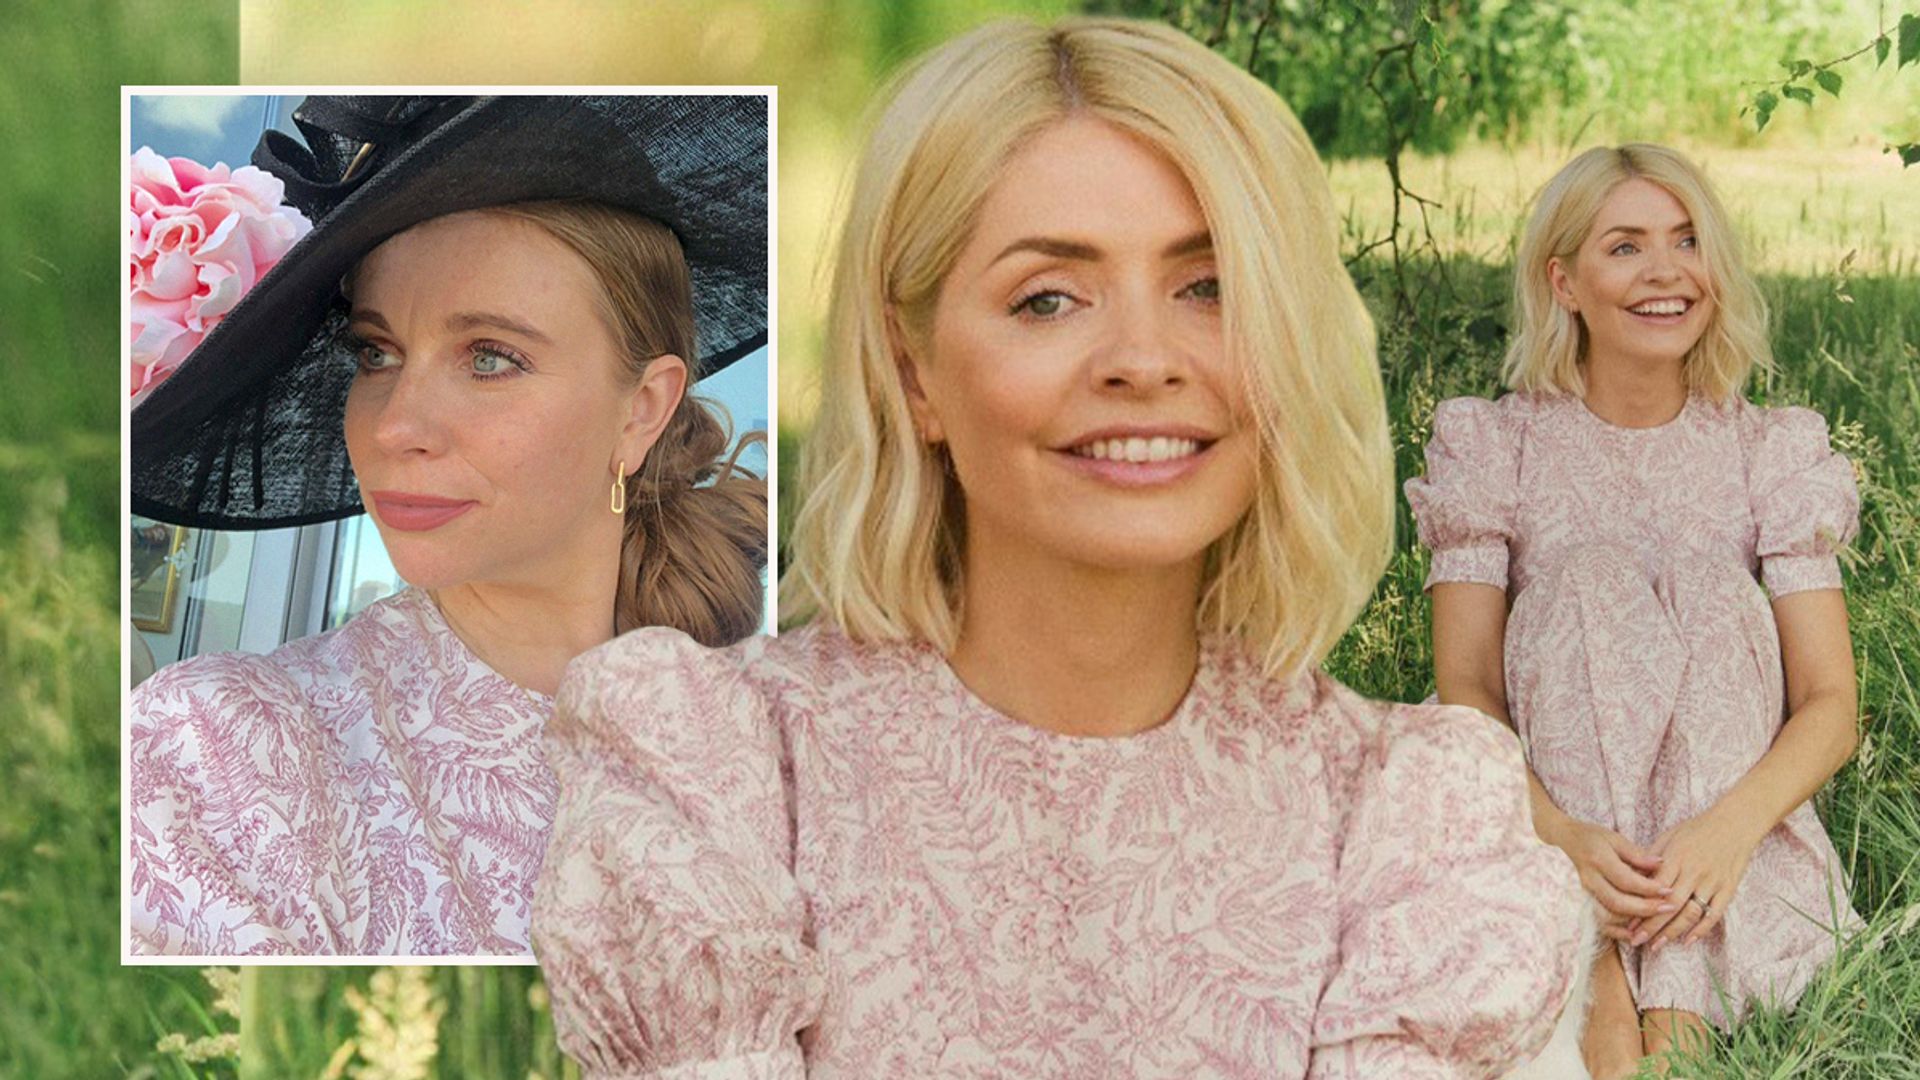 Fashion Editor Laura Sutcliffe wears Holly Willoughby's latest dress from Instagram by The Vampire's Wife